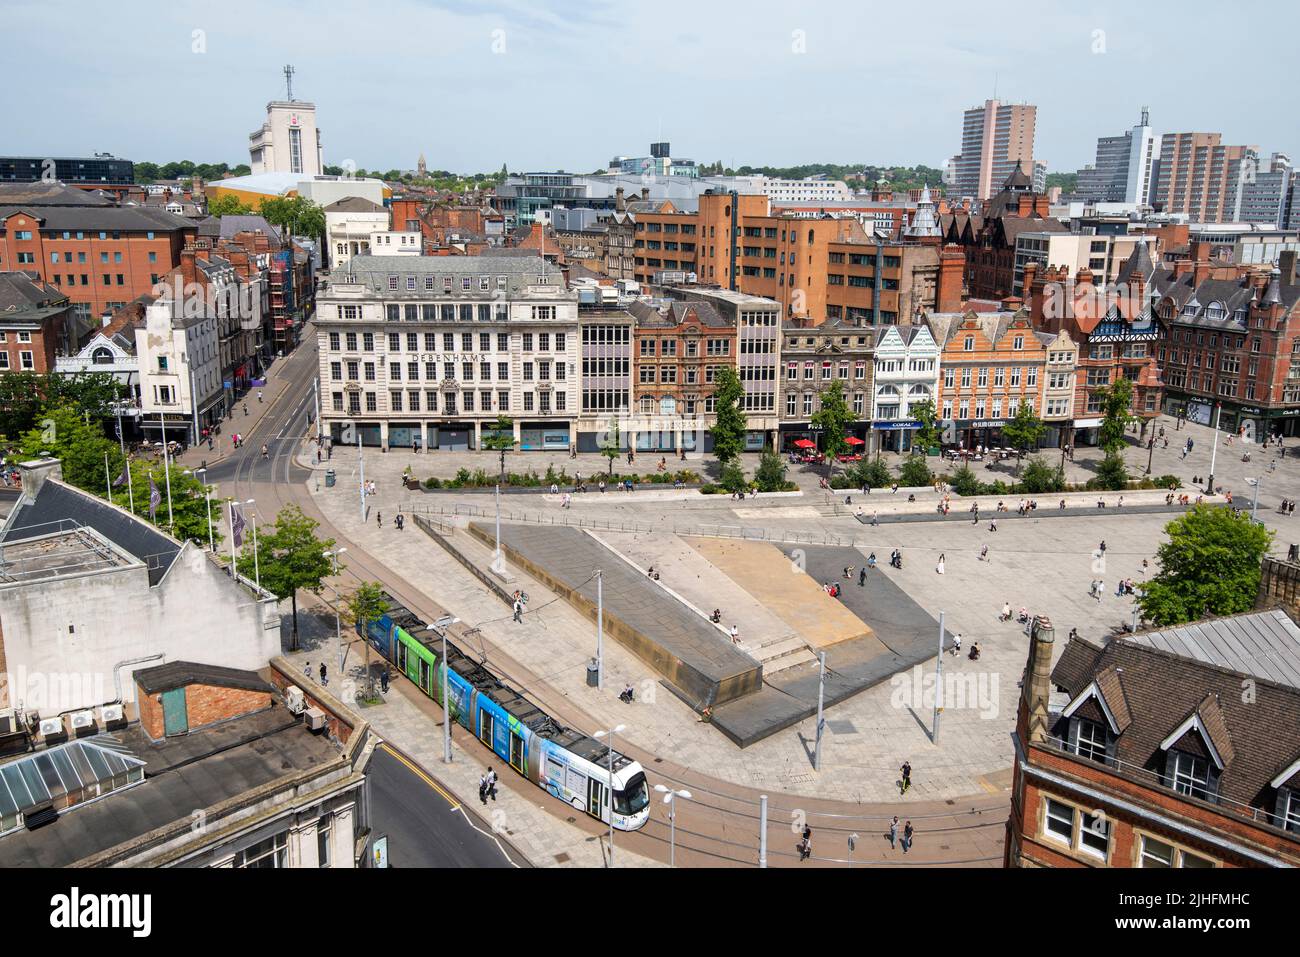 Aerial view of Market Square from the rooftop of the Pearl Assurance Building in Nottingham City, Nottinghamshire England UK Stock Photo